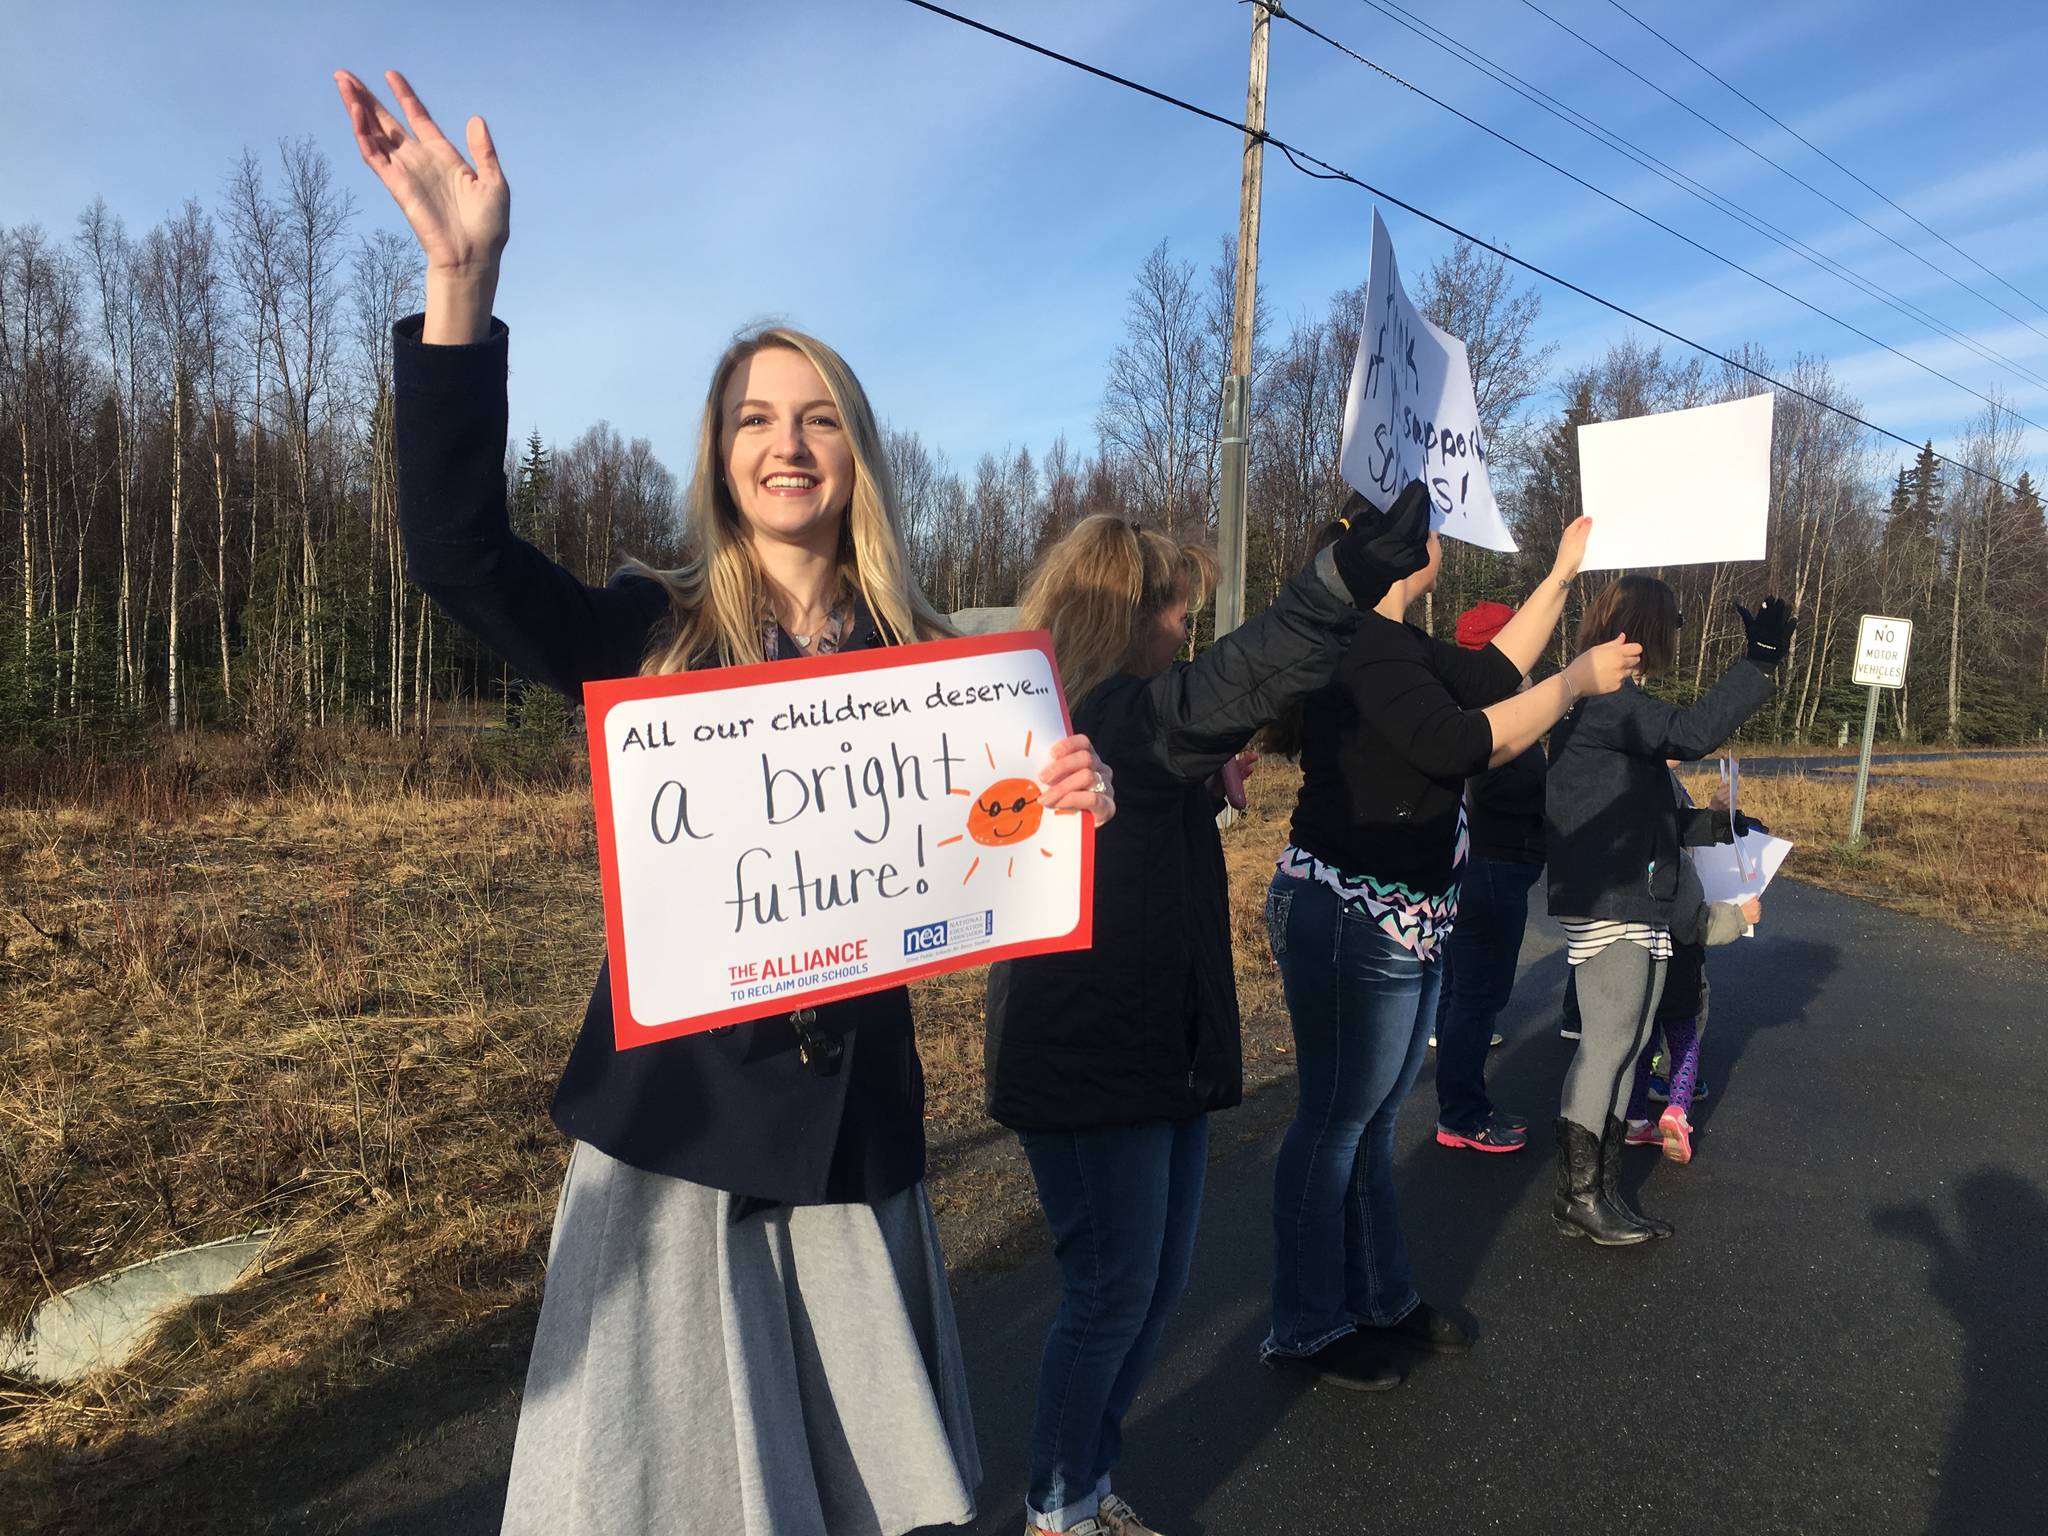 Callie Giordano, a teacher at Mountain View Elementary, participated in a rally on Tuesday, May 2, 2017 at the corner of Swires Road and the Kenai Spur Highway to support fully funding education. (Kat Sorensen/Peninsula Clarion)